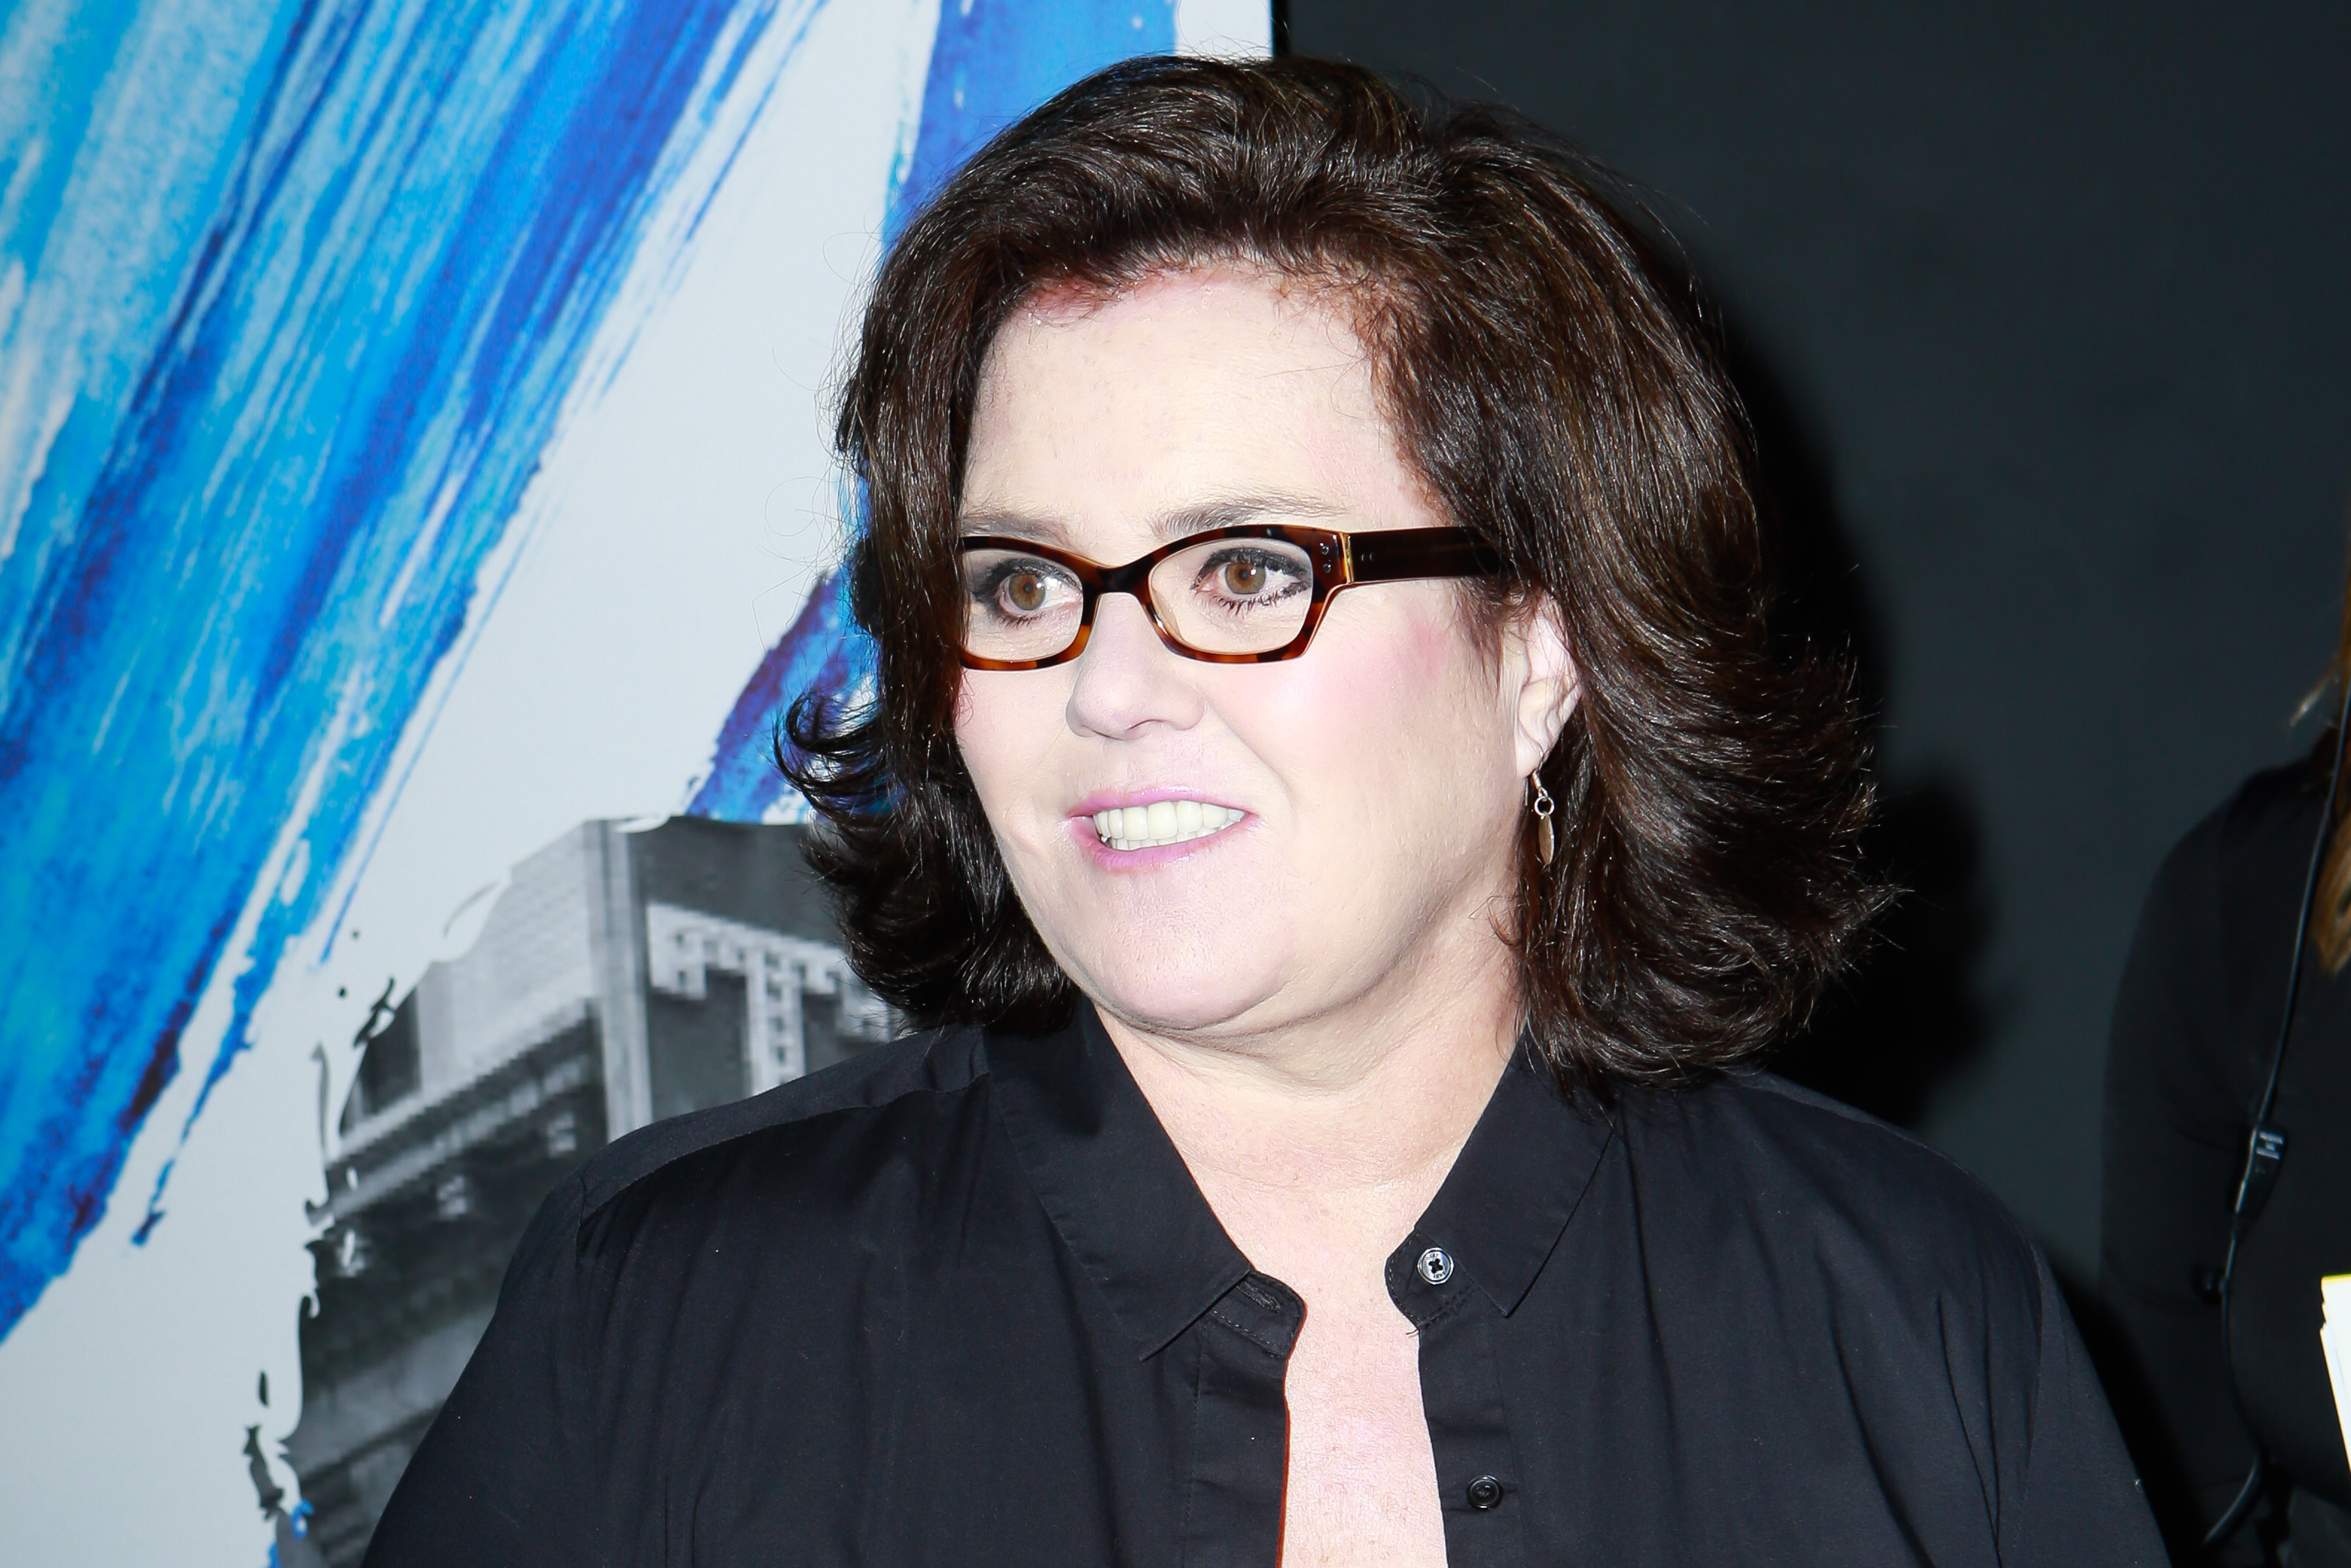 Rosie O'Donnell attended "Sunday In The Park With George" on Opening Night  at The Hudson Theatre on February 23, 2017 in New York City. (Gonzalo Marroquin&mdash;Patrick McMullan via Getty Image)